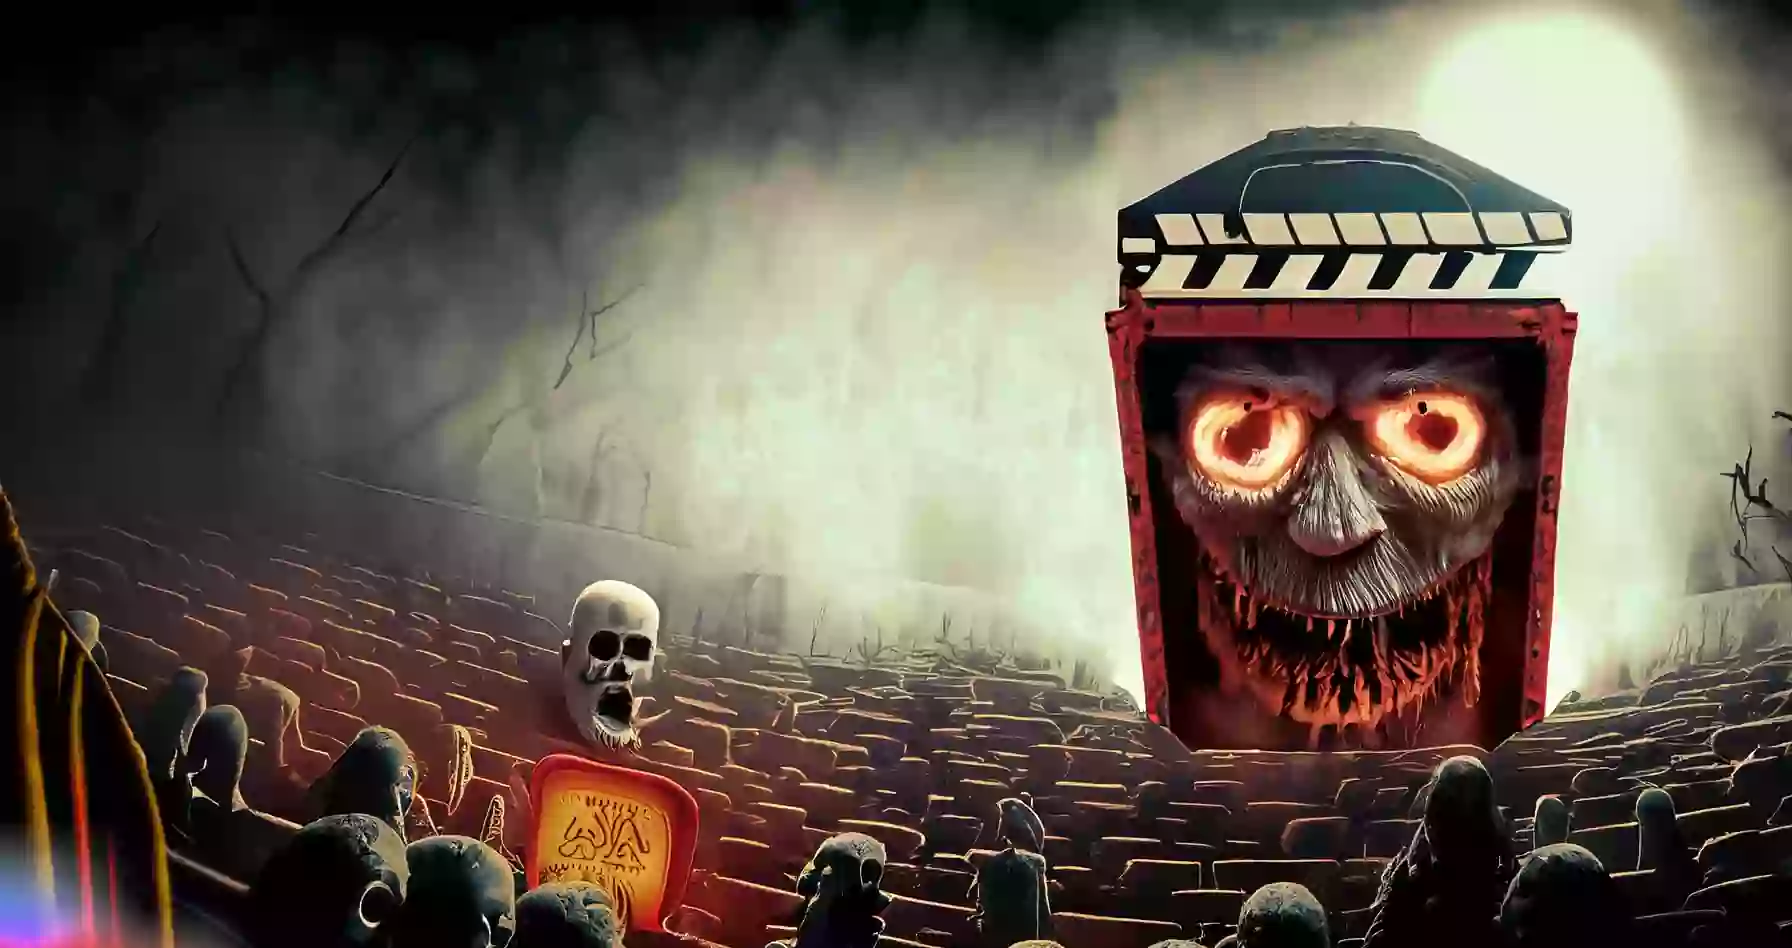 Cinema of Horrors: A Unique and Immersive Halloween Experience